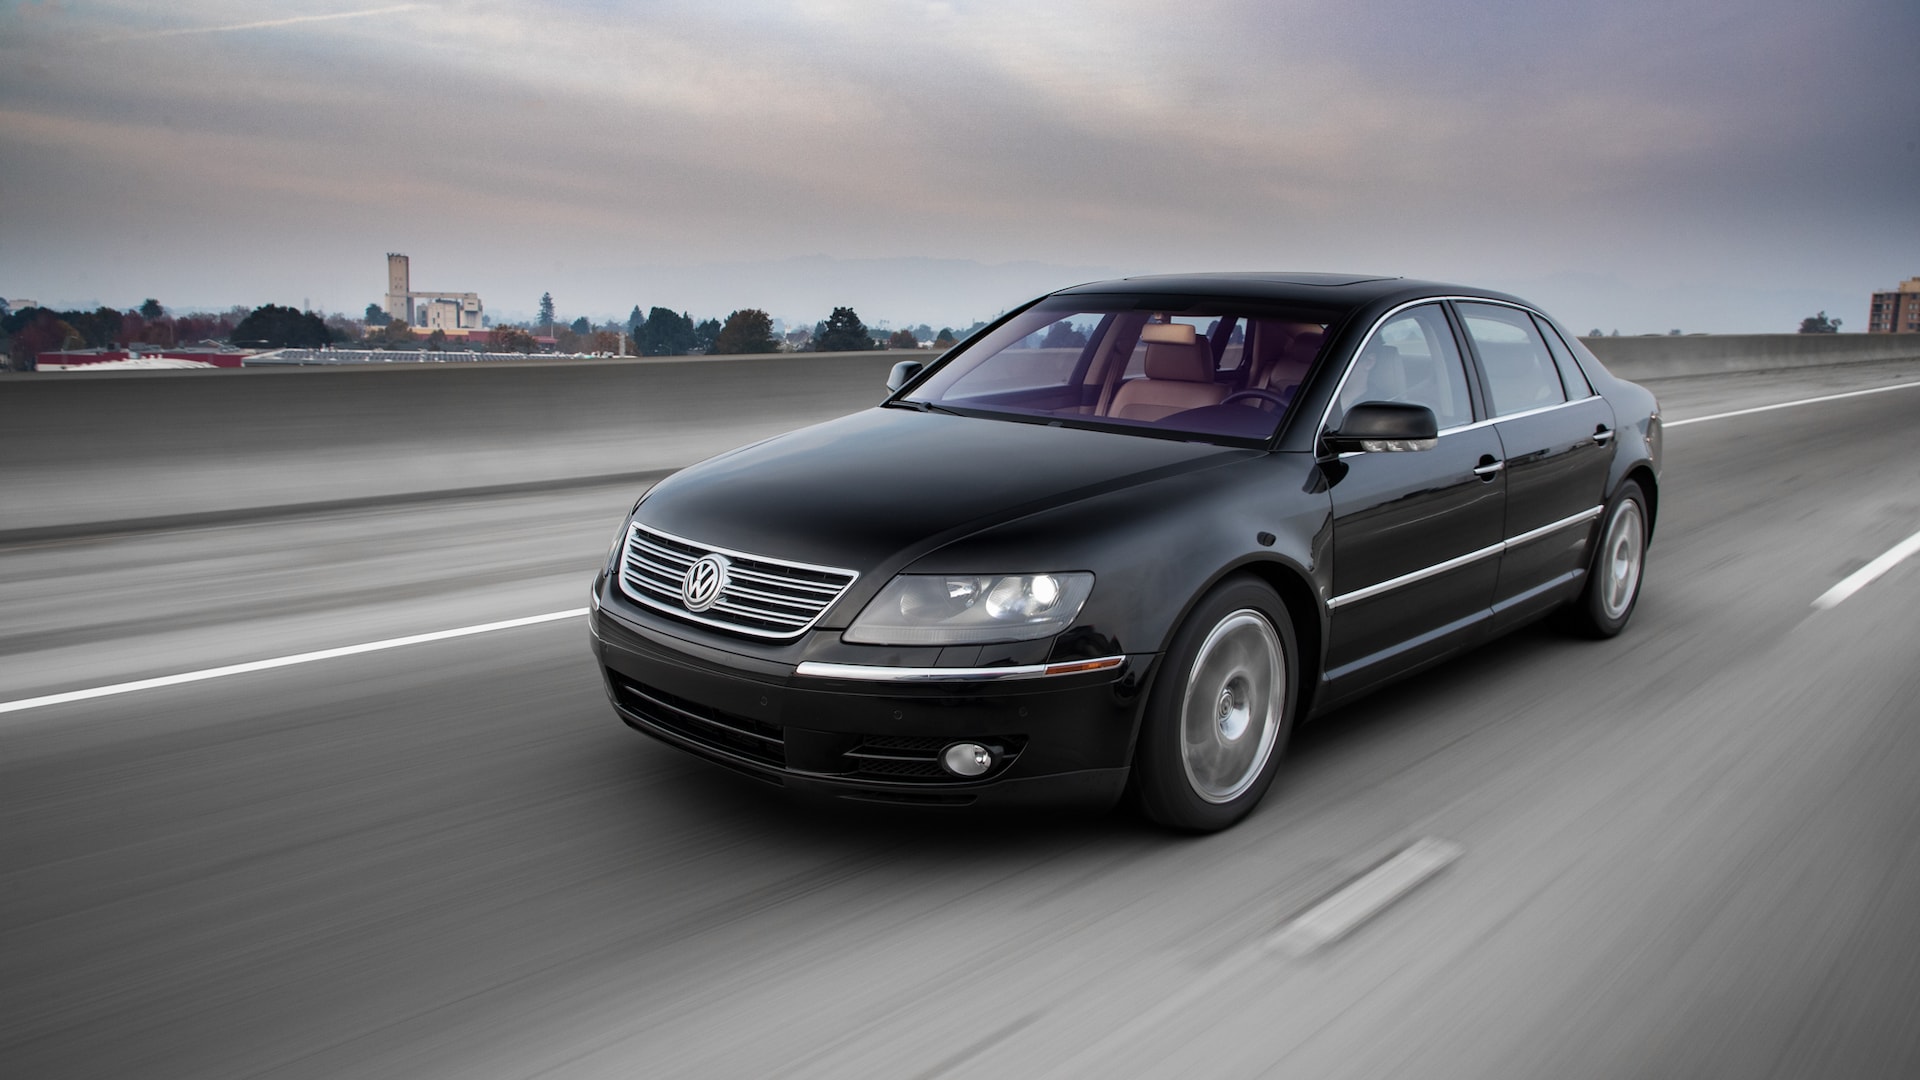 We Drive This Barn-Find 2004 Volkswagen Phaeton, and It Still Impresses